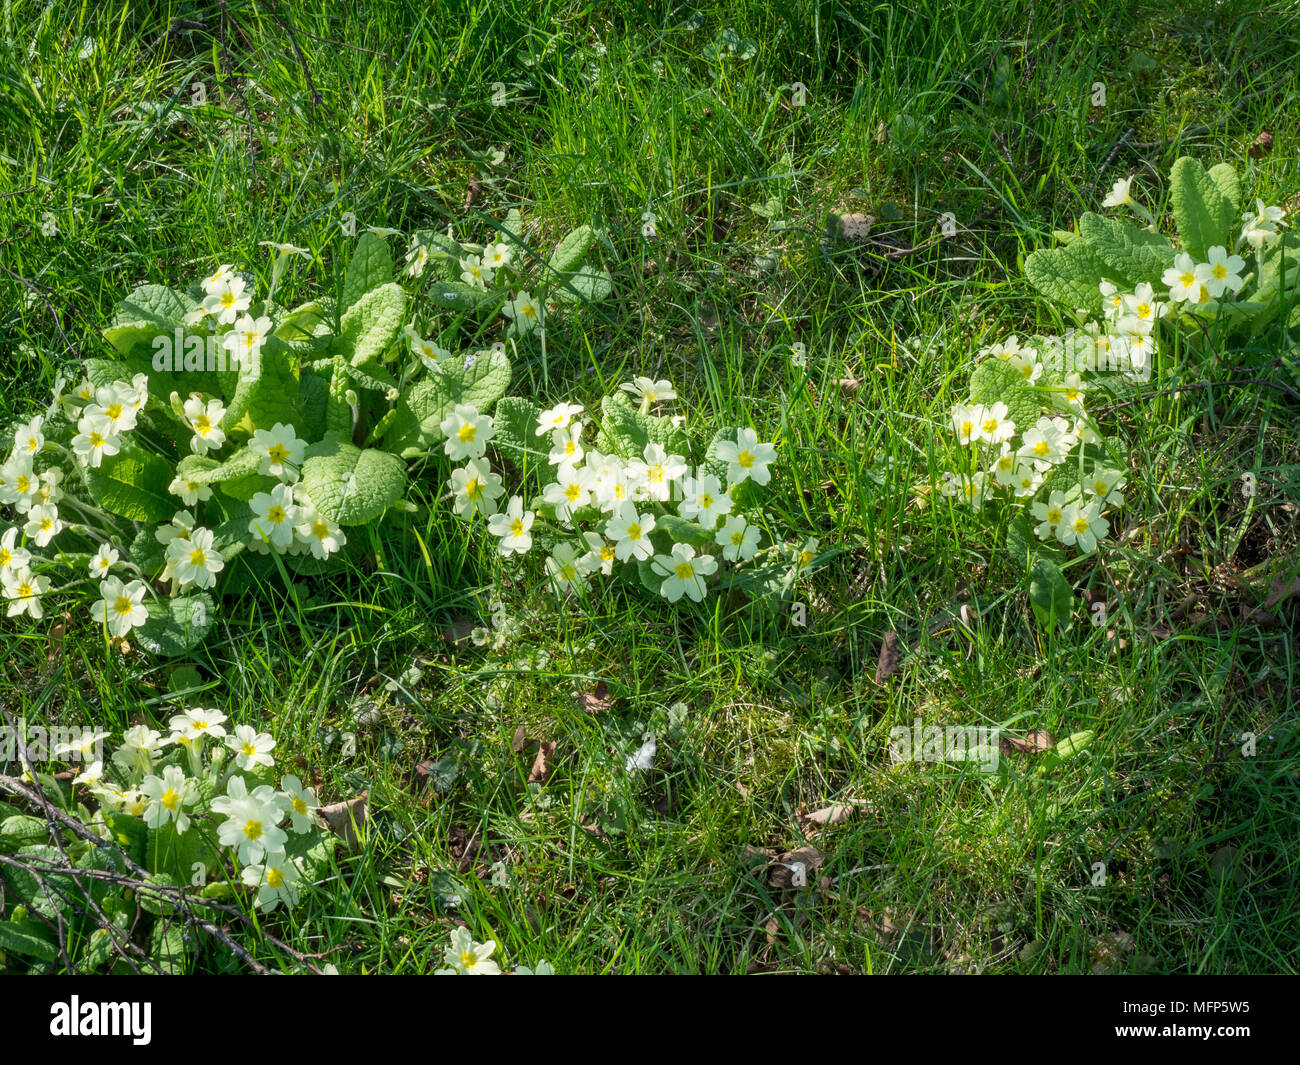 Patches of common yellow primroses growing in dappled shade beneath a tree Stock Photo